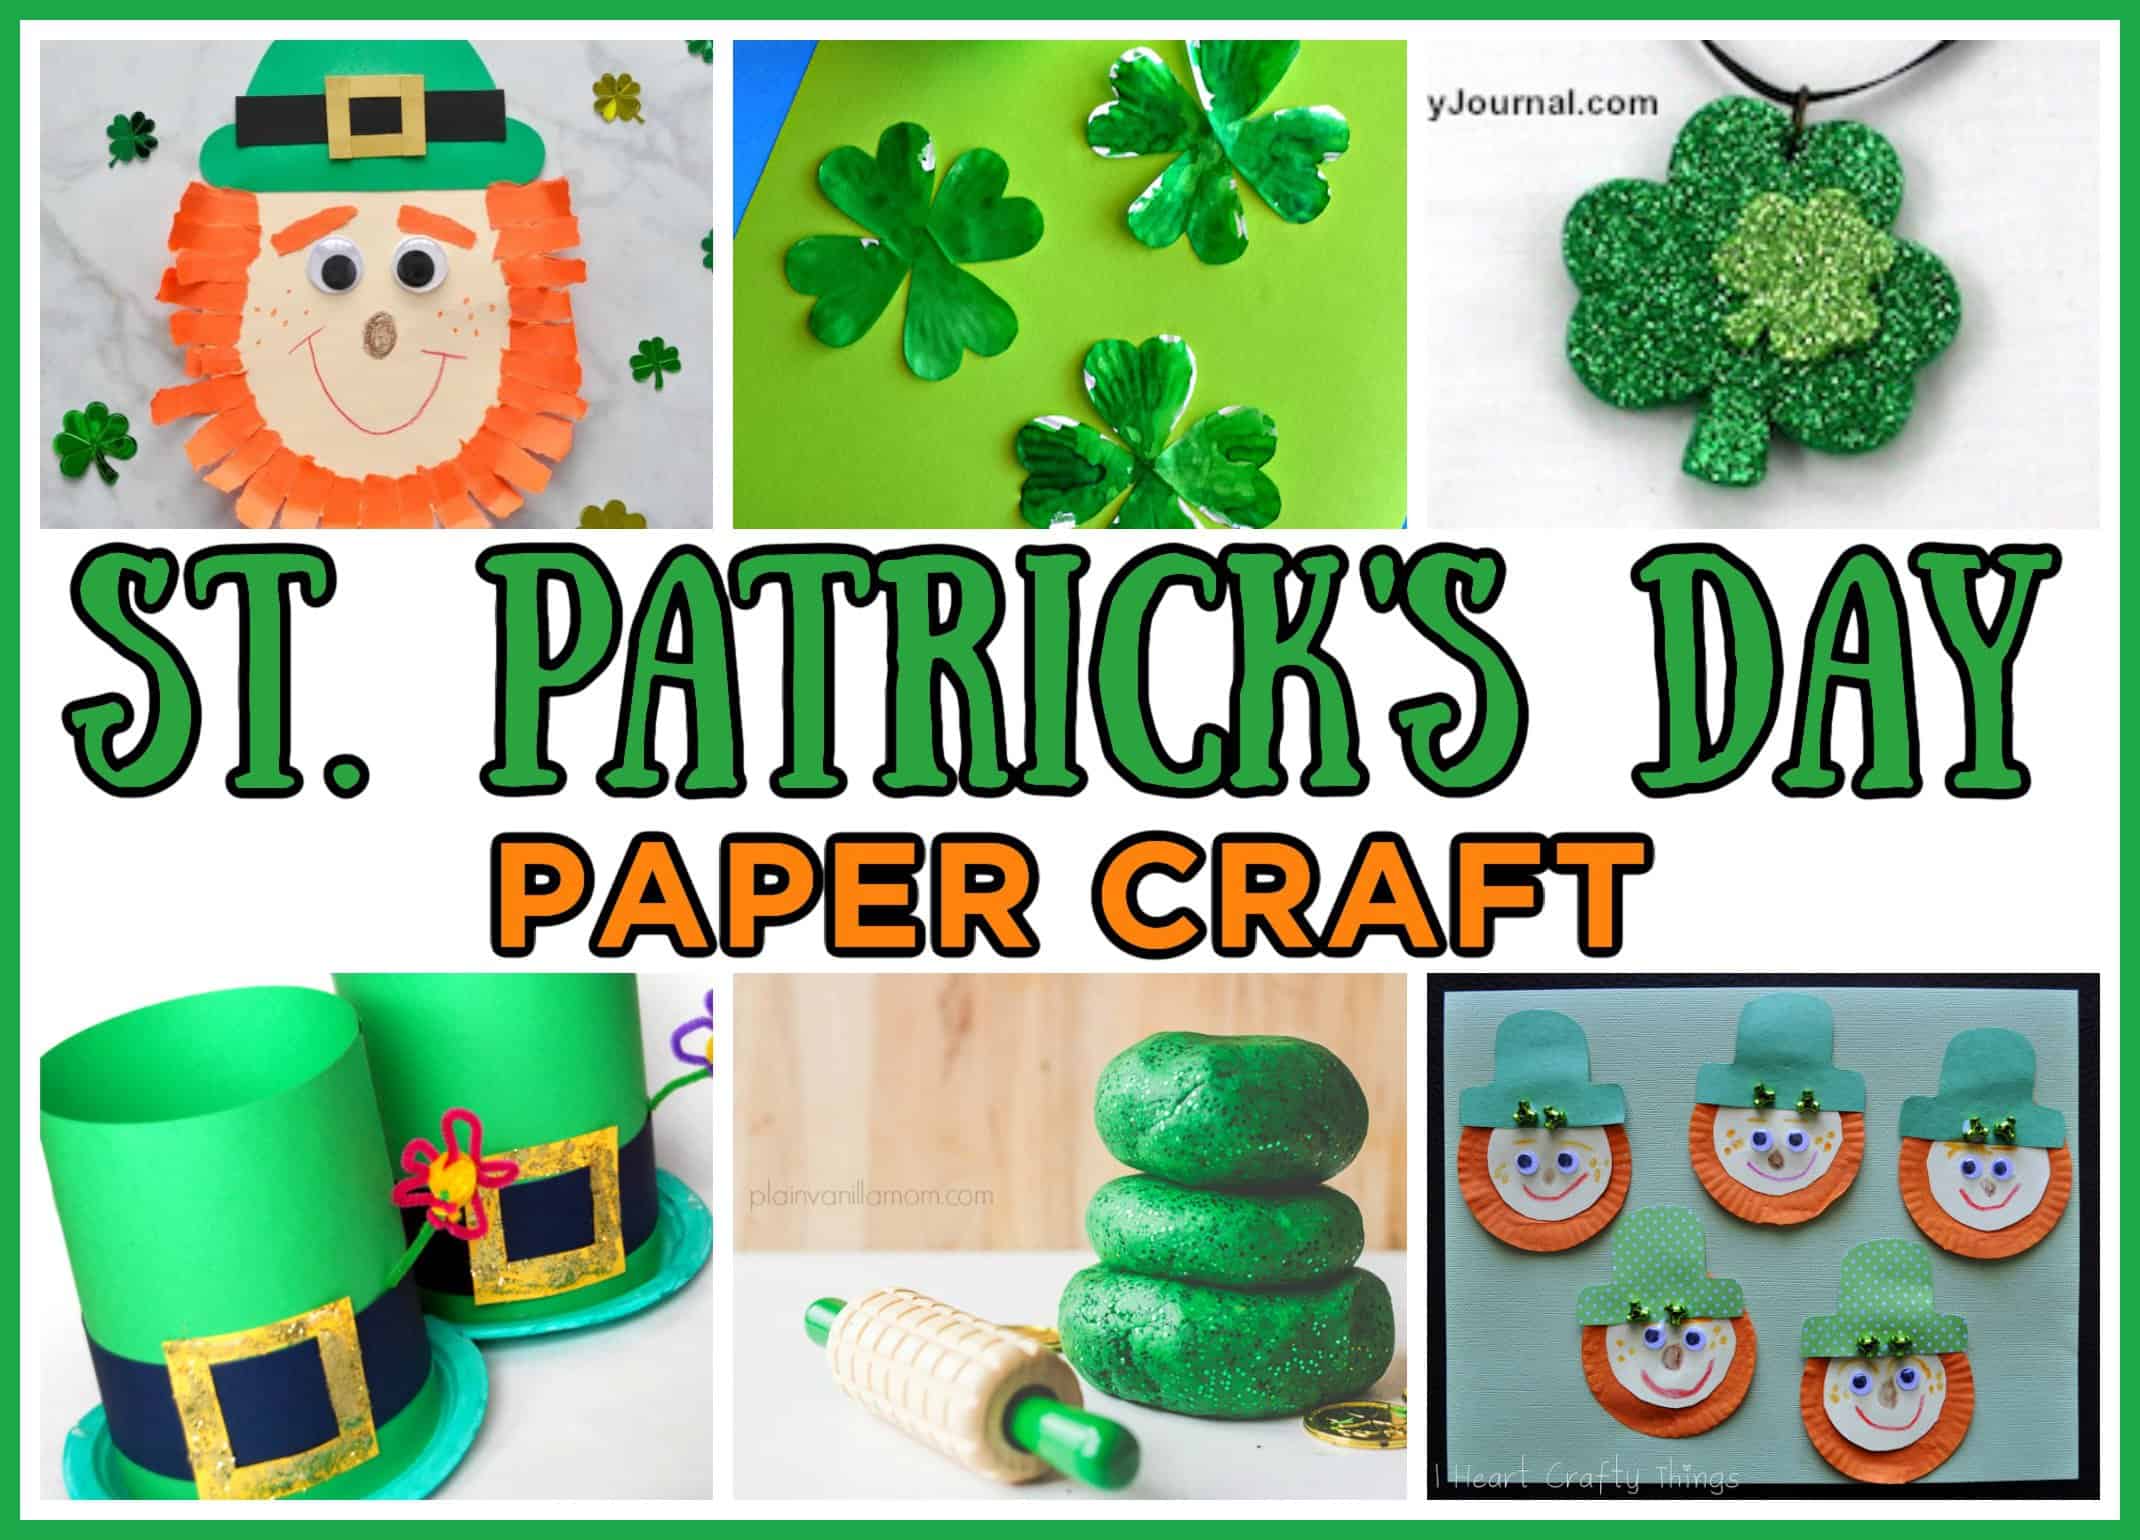 St. Patrick's Day Paper Crafts